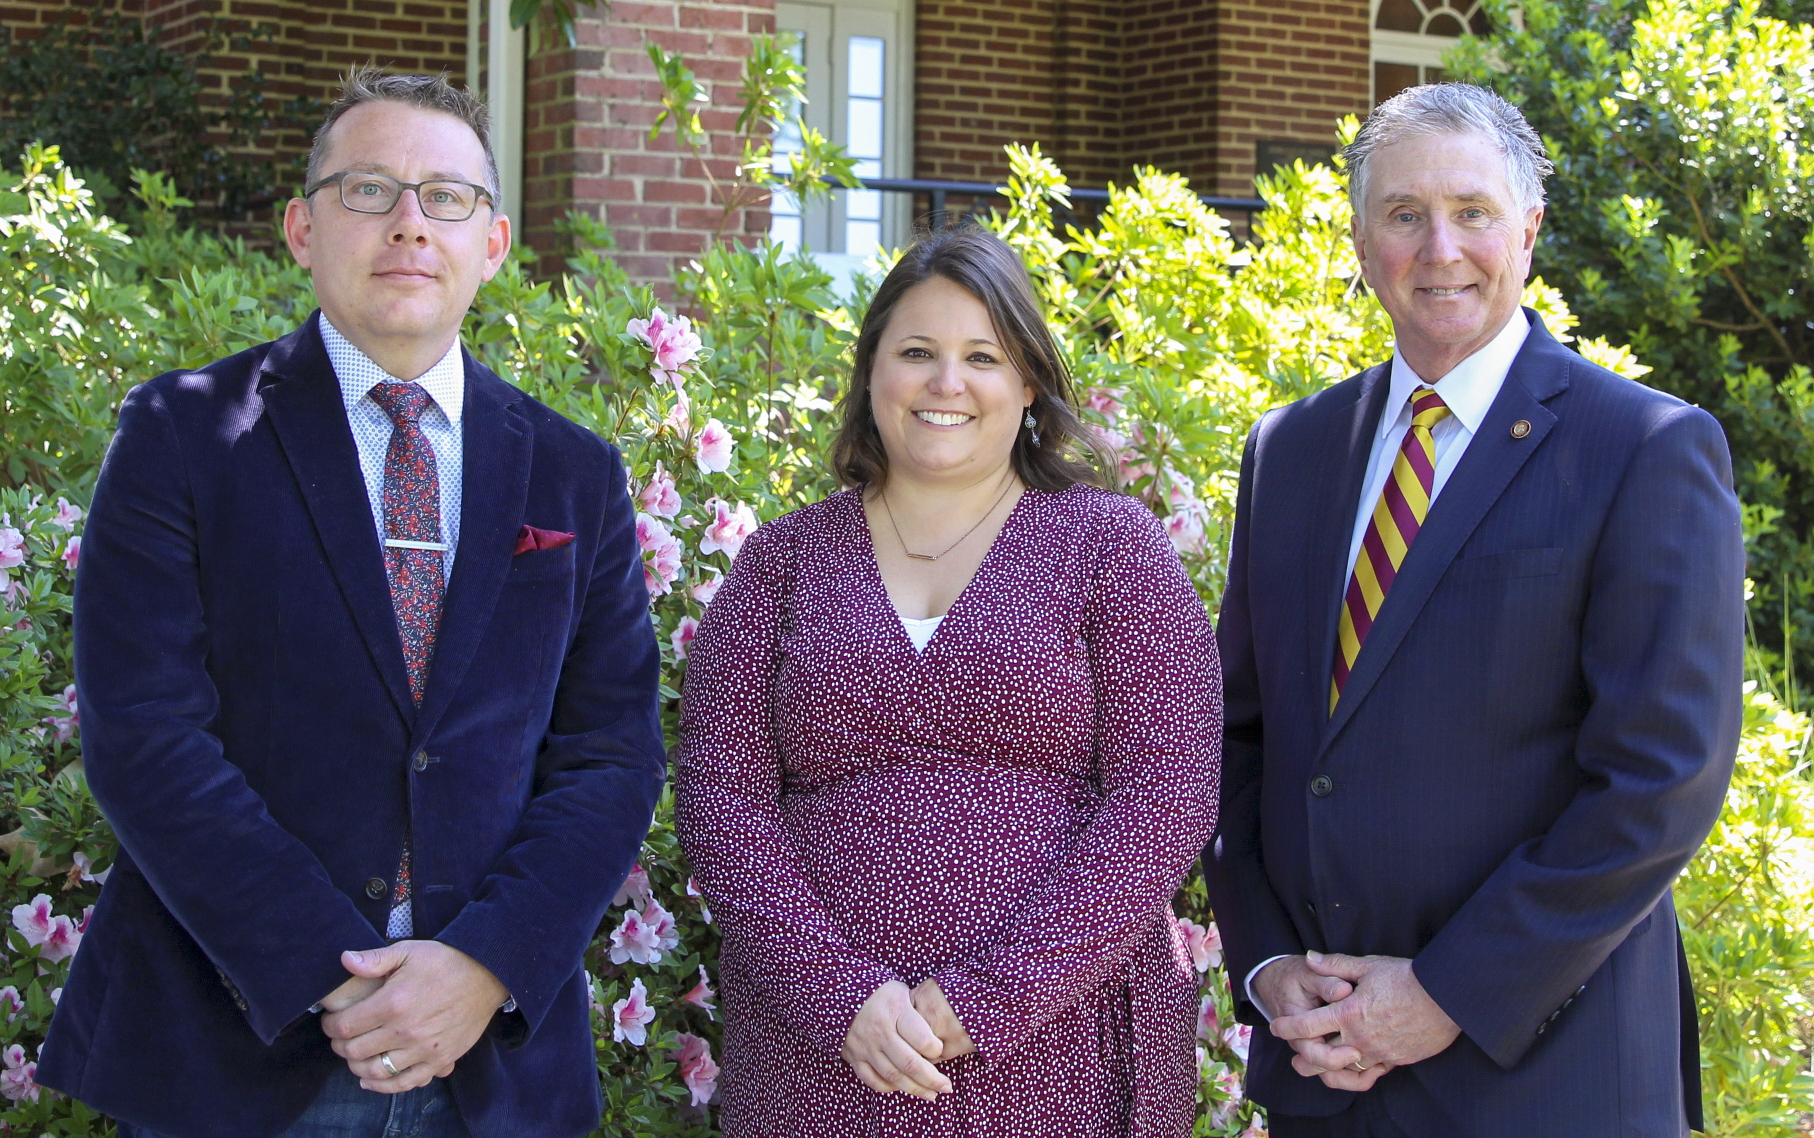 From left, Kevin Pace '02, Sarah Babcock '09, and Drew Van Horn '82